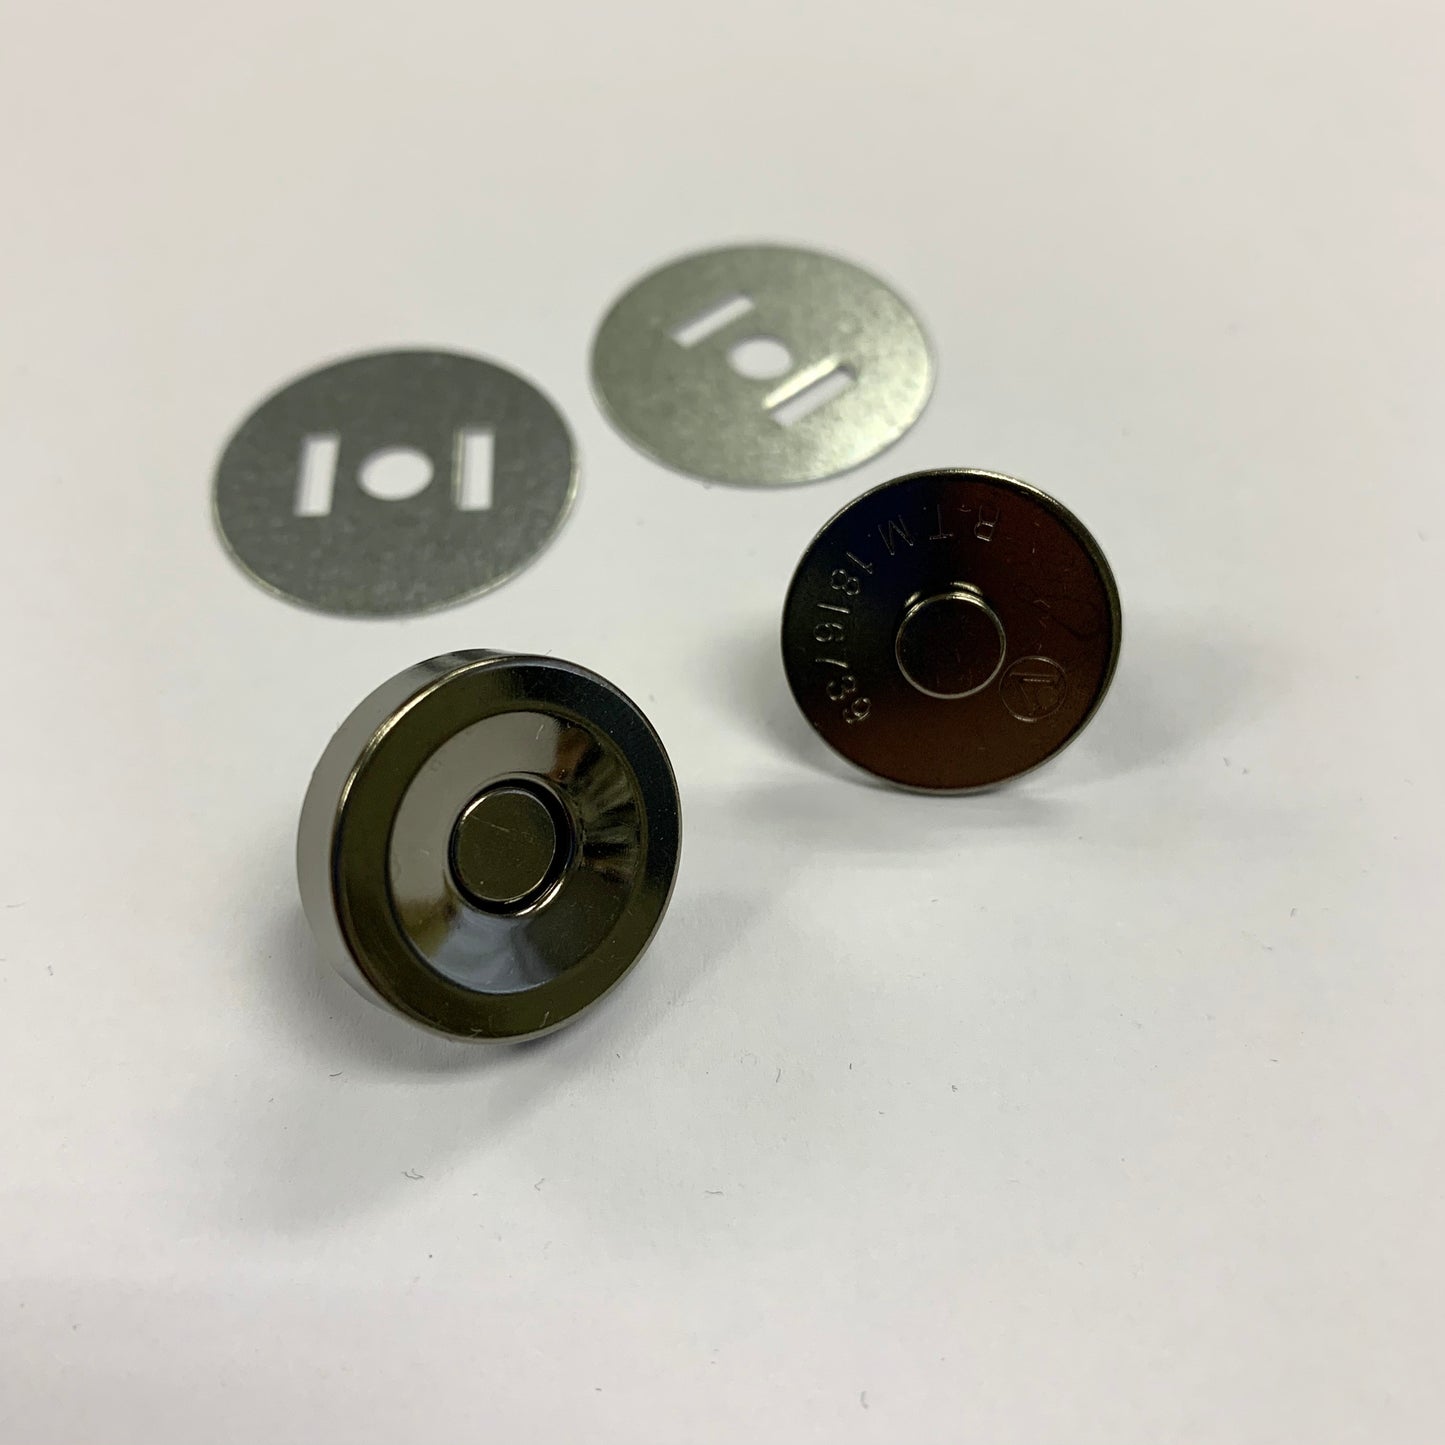 Round Strong Magnet Button 強力磁石扣19mm - 4 colors